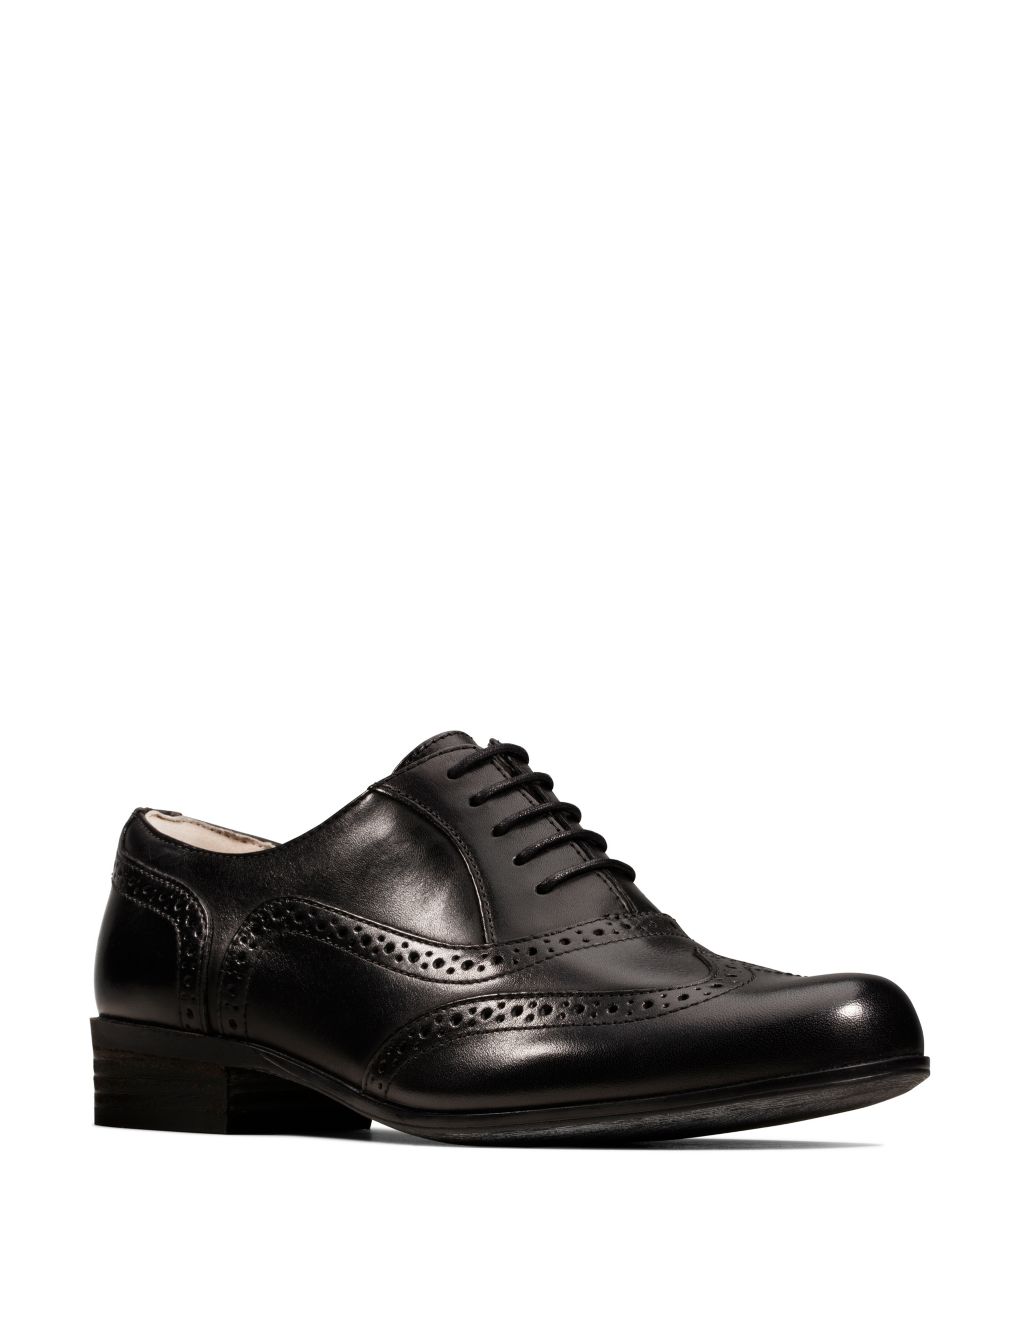 Leather Lace Up Brogues image 2